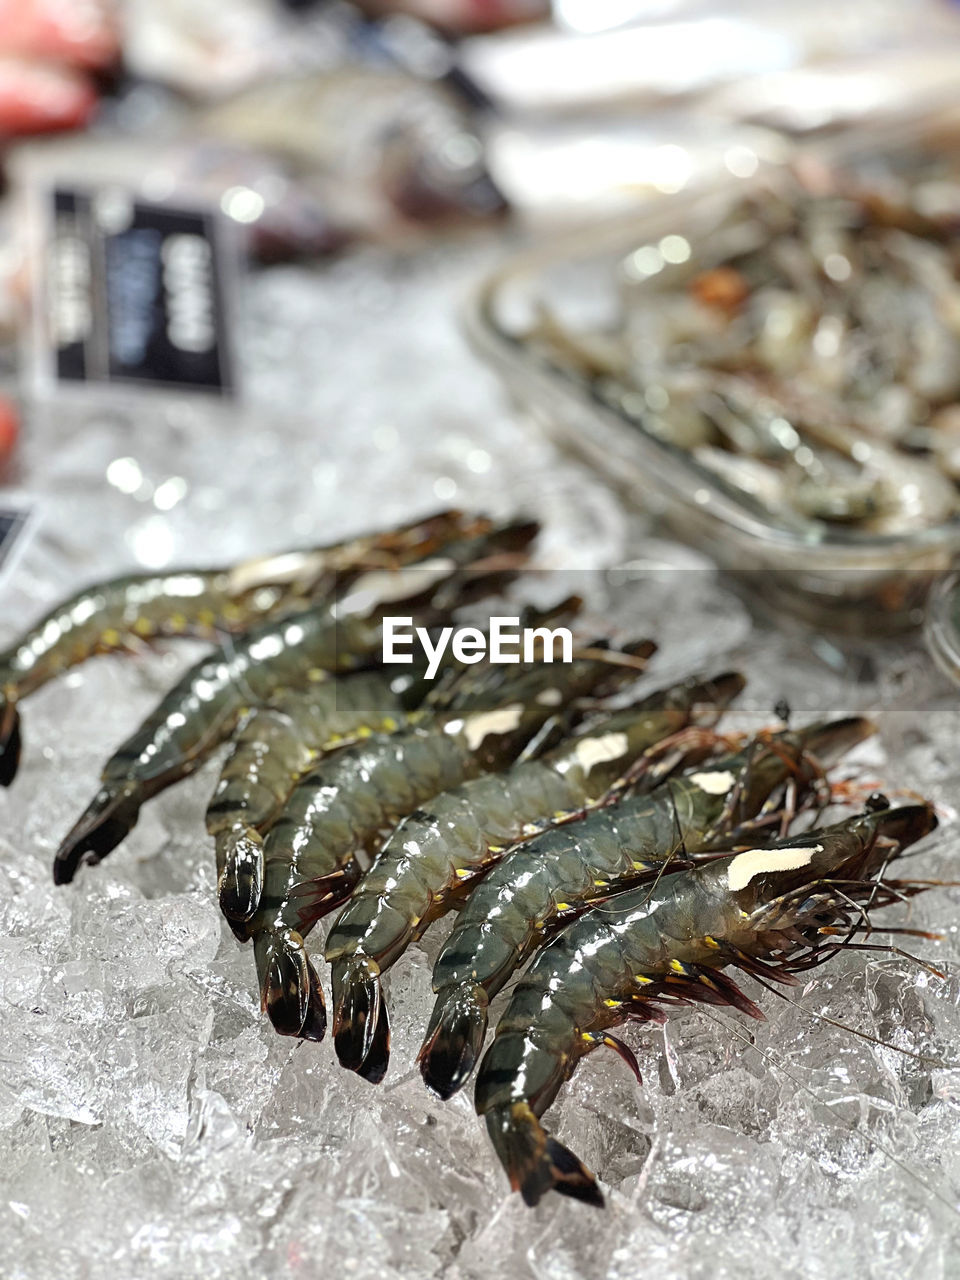 seafood, food, food and drink, fish, animal, freshness, cold temperature, raw food, wellbeing, no people, market, ice, close-up, healthy eating, sardine, for sale, fishing industry, fish market, fishing, animal themes, retail, indoors, focus on foreground, business, selective focus